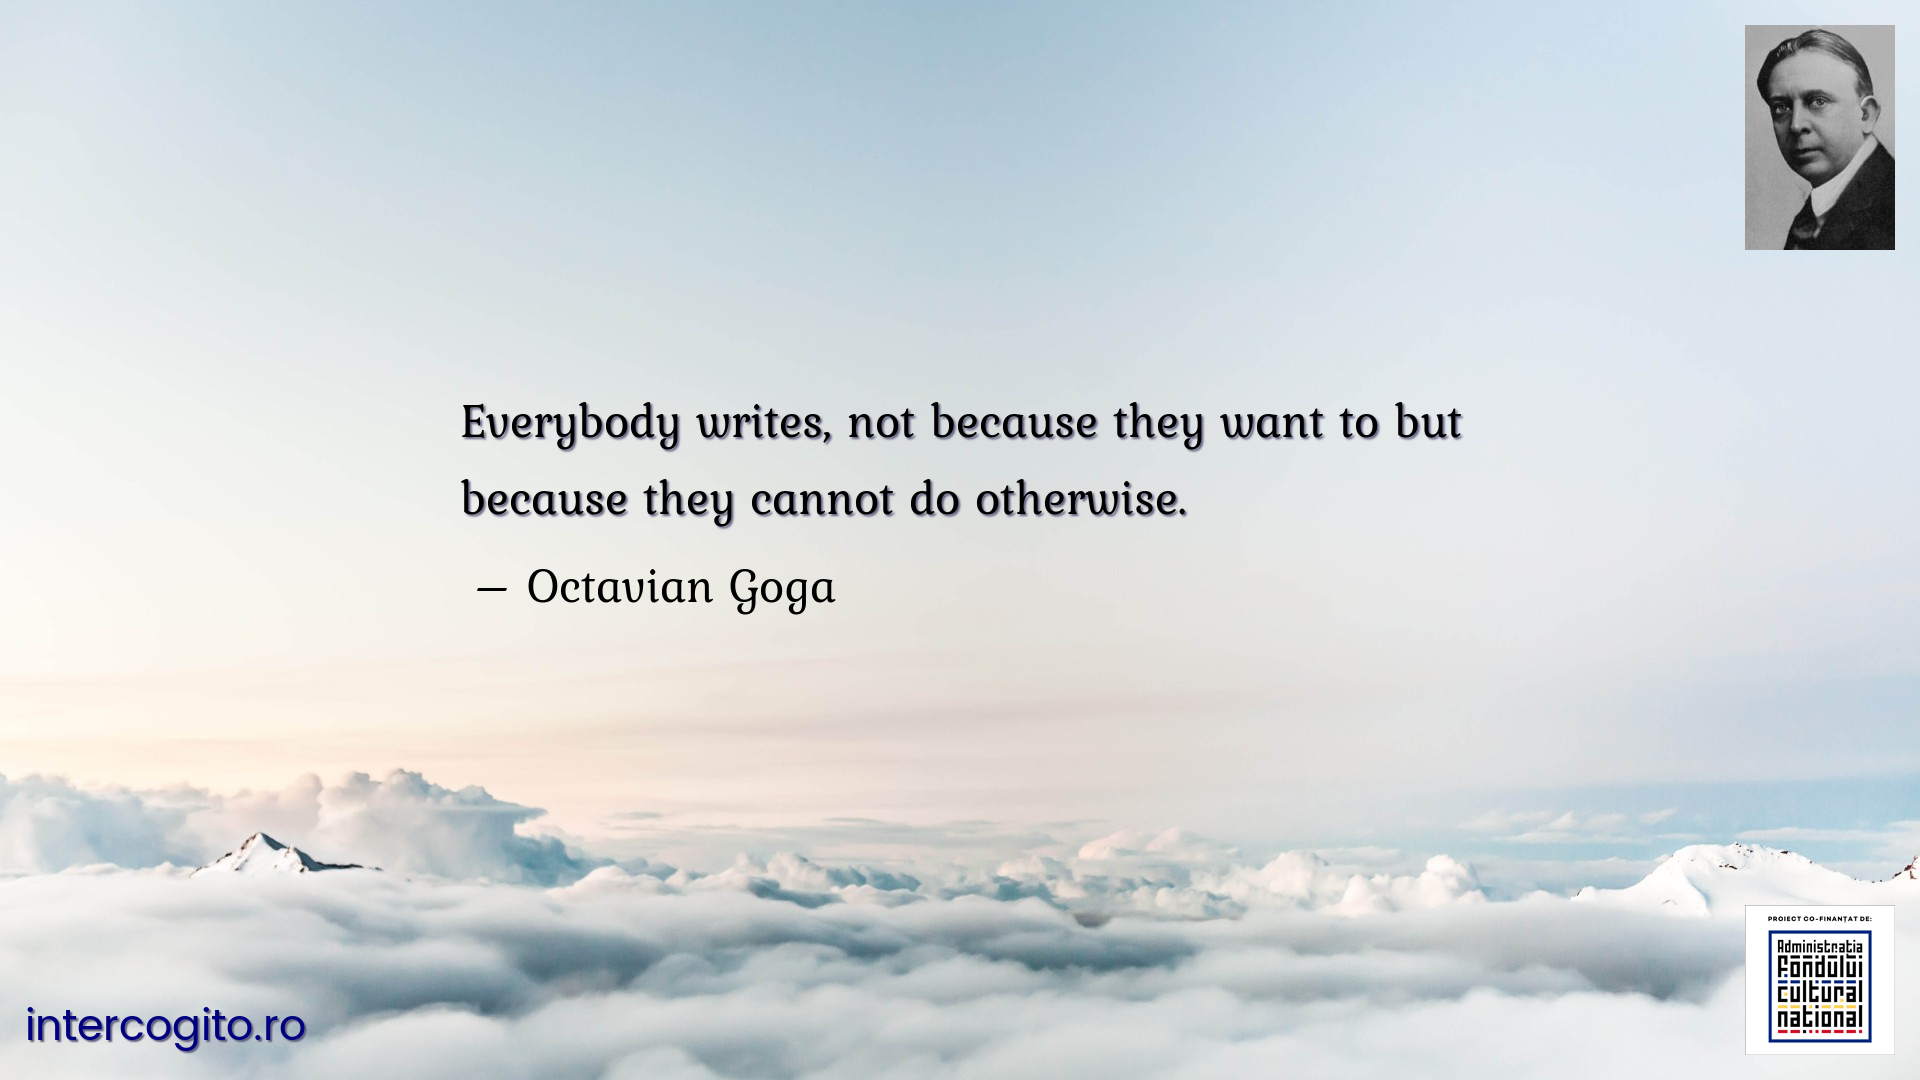 Everybody writes, not because they want to but because they cannot do otherwise.